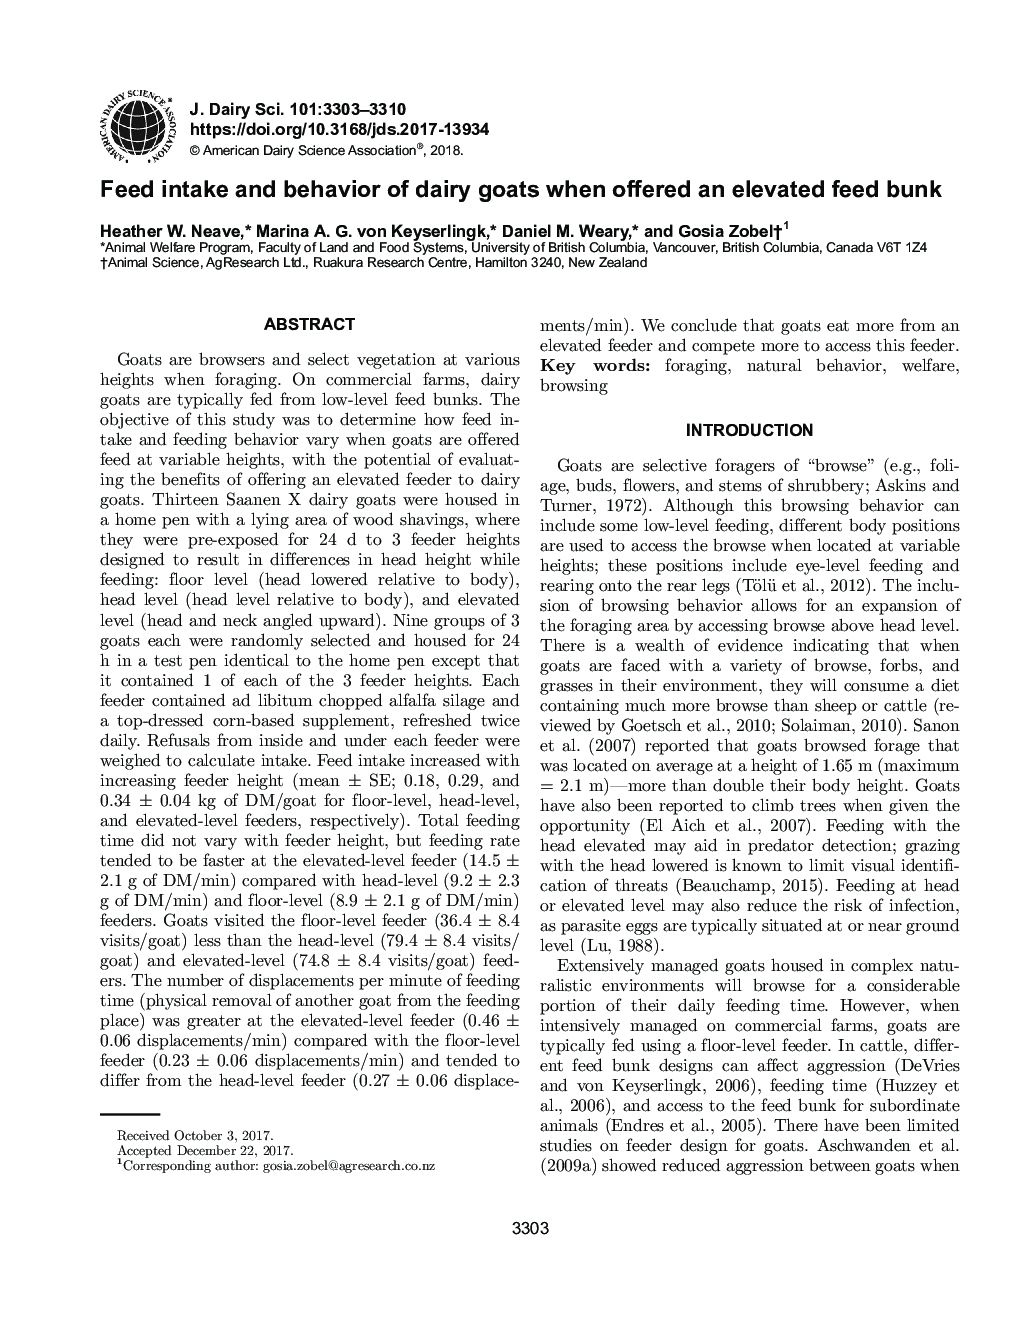 Feed intake and behavior of dairy goats when offered an elevated feed bunk